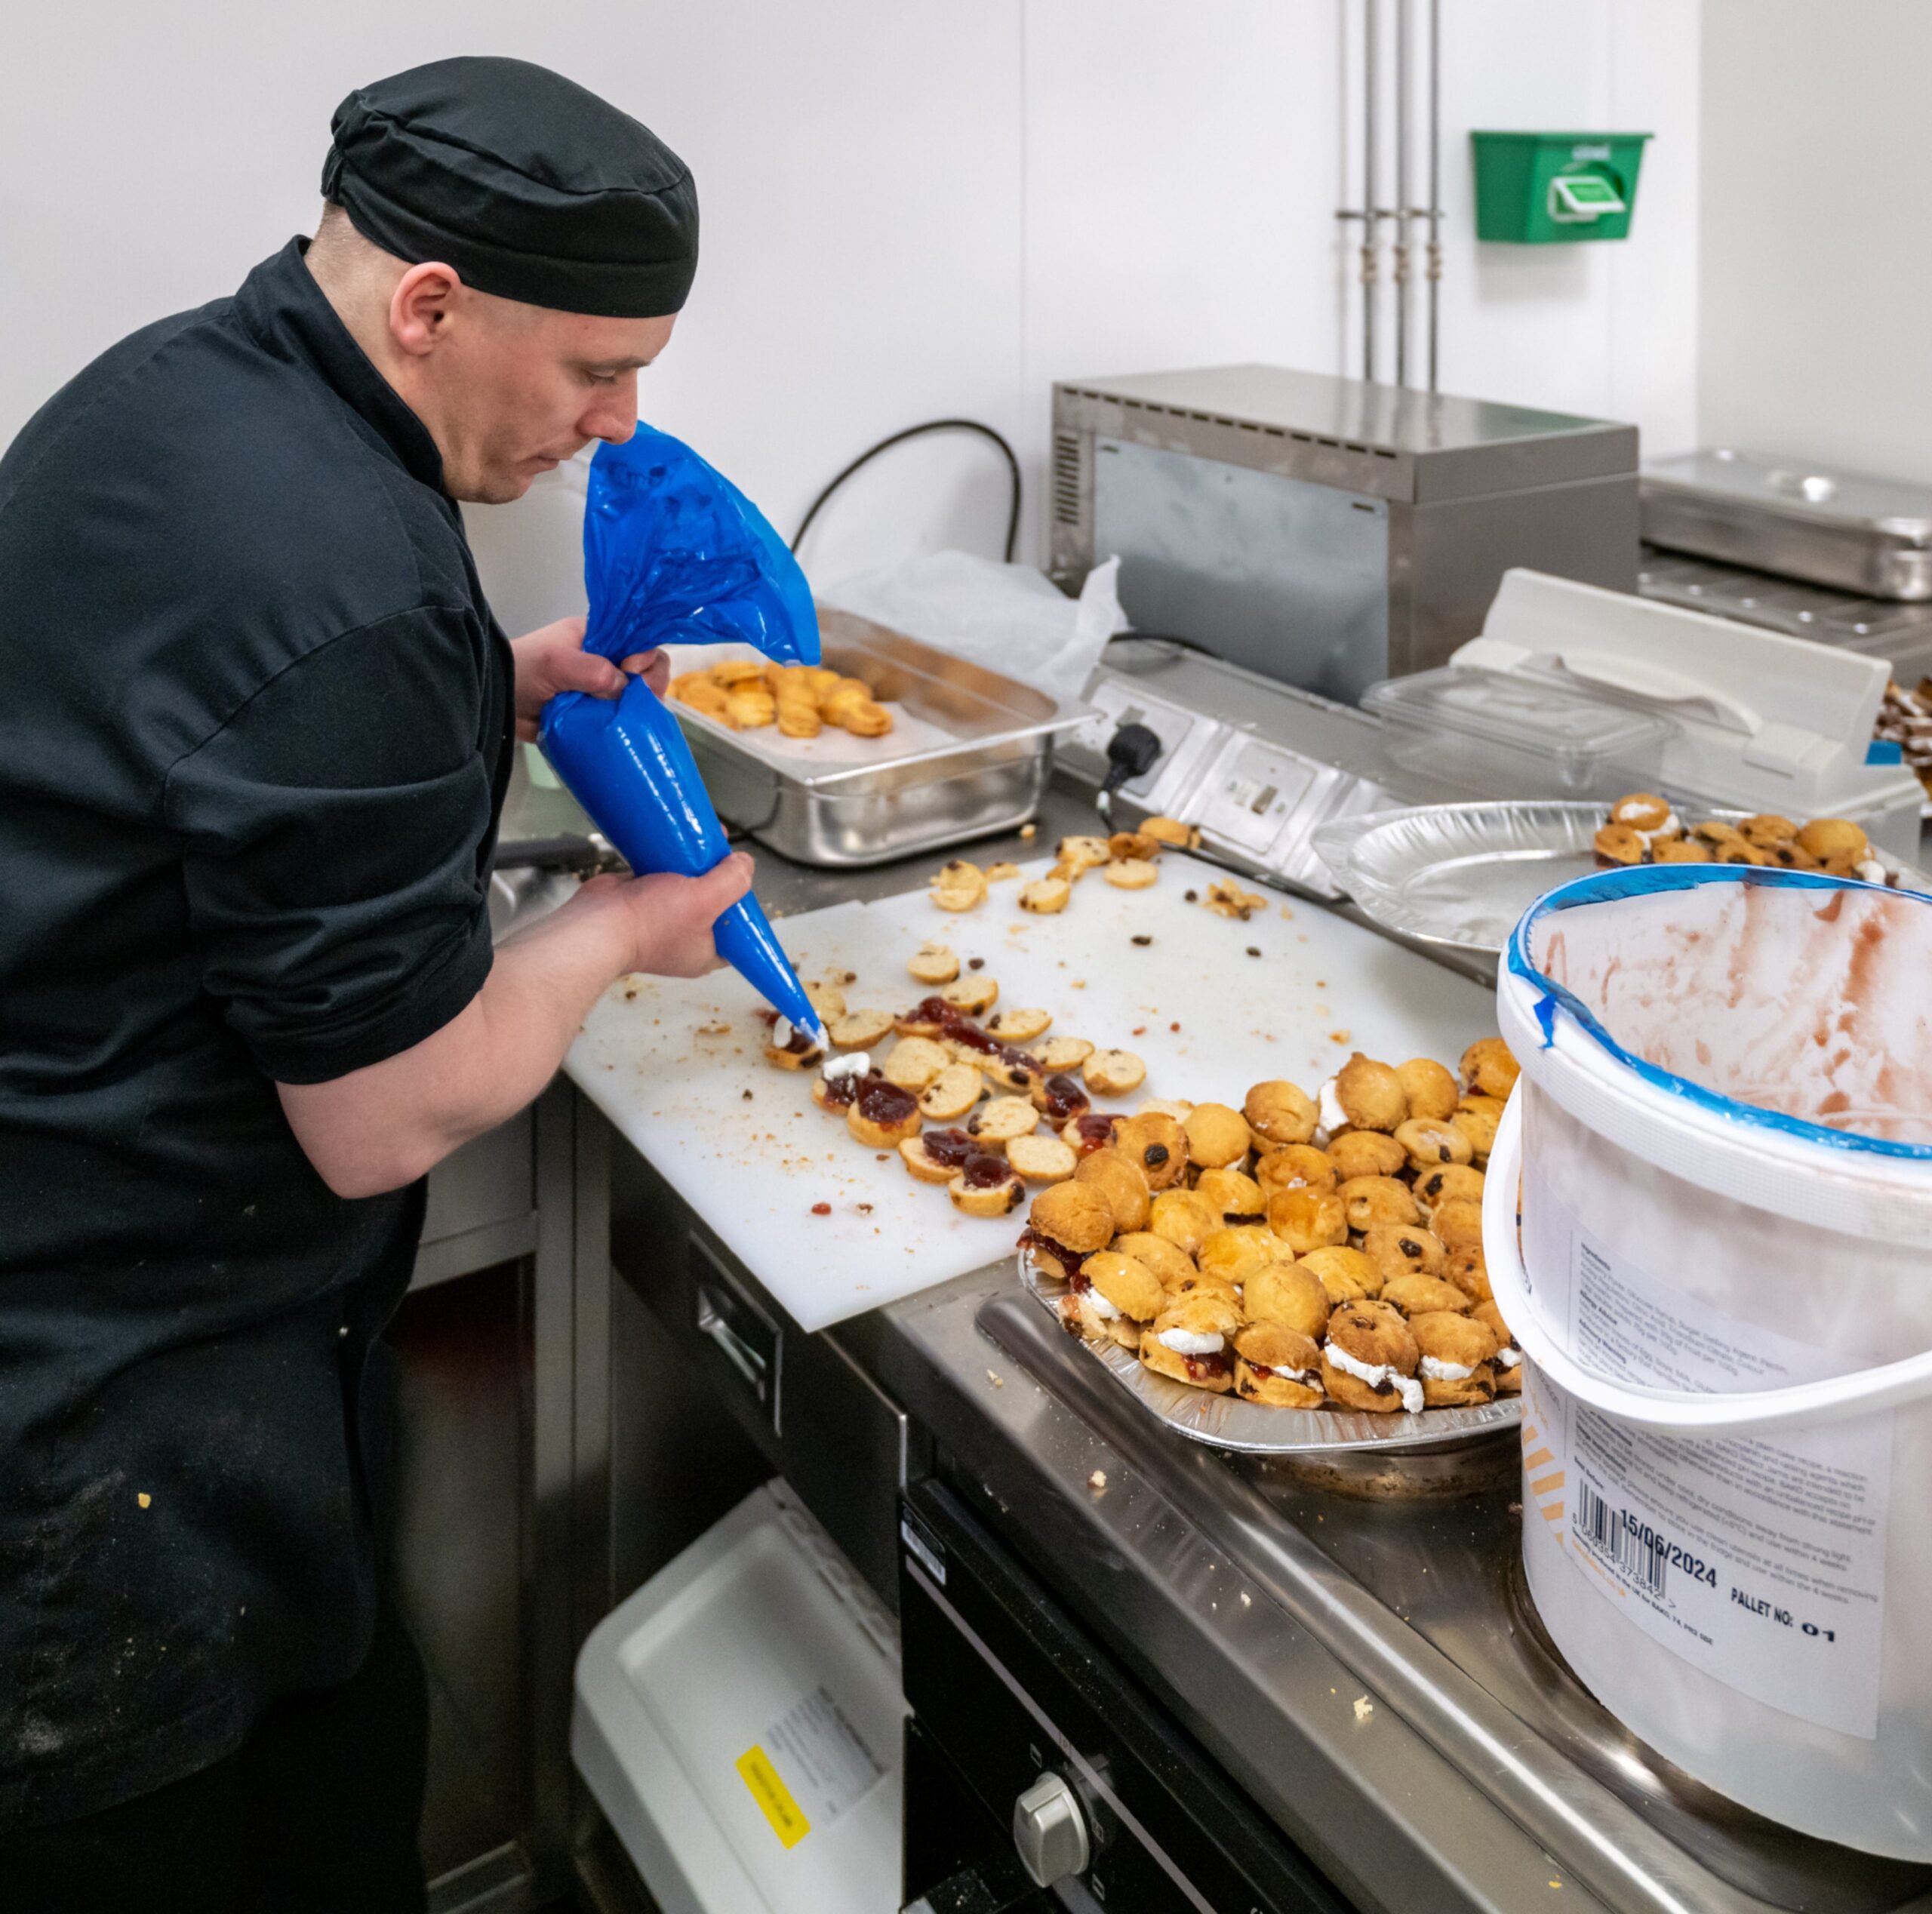 HMP Grampian inmate Steven working in the Greene King Training Academy kitchen.